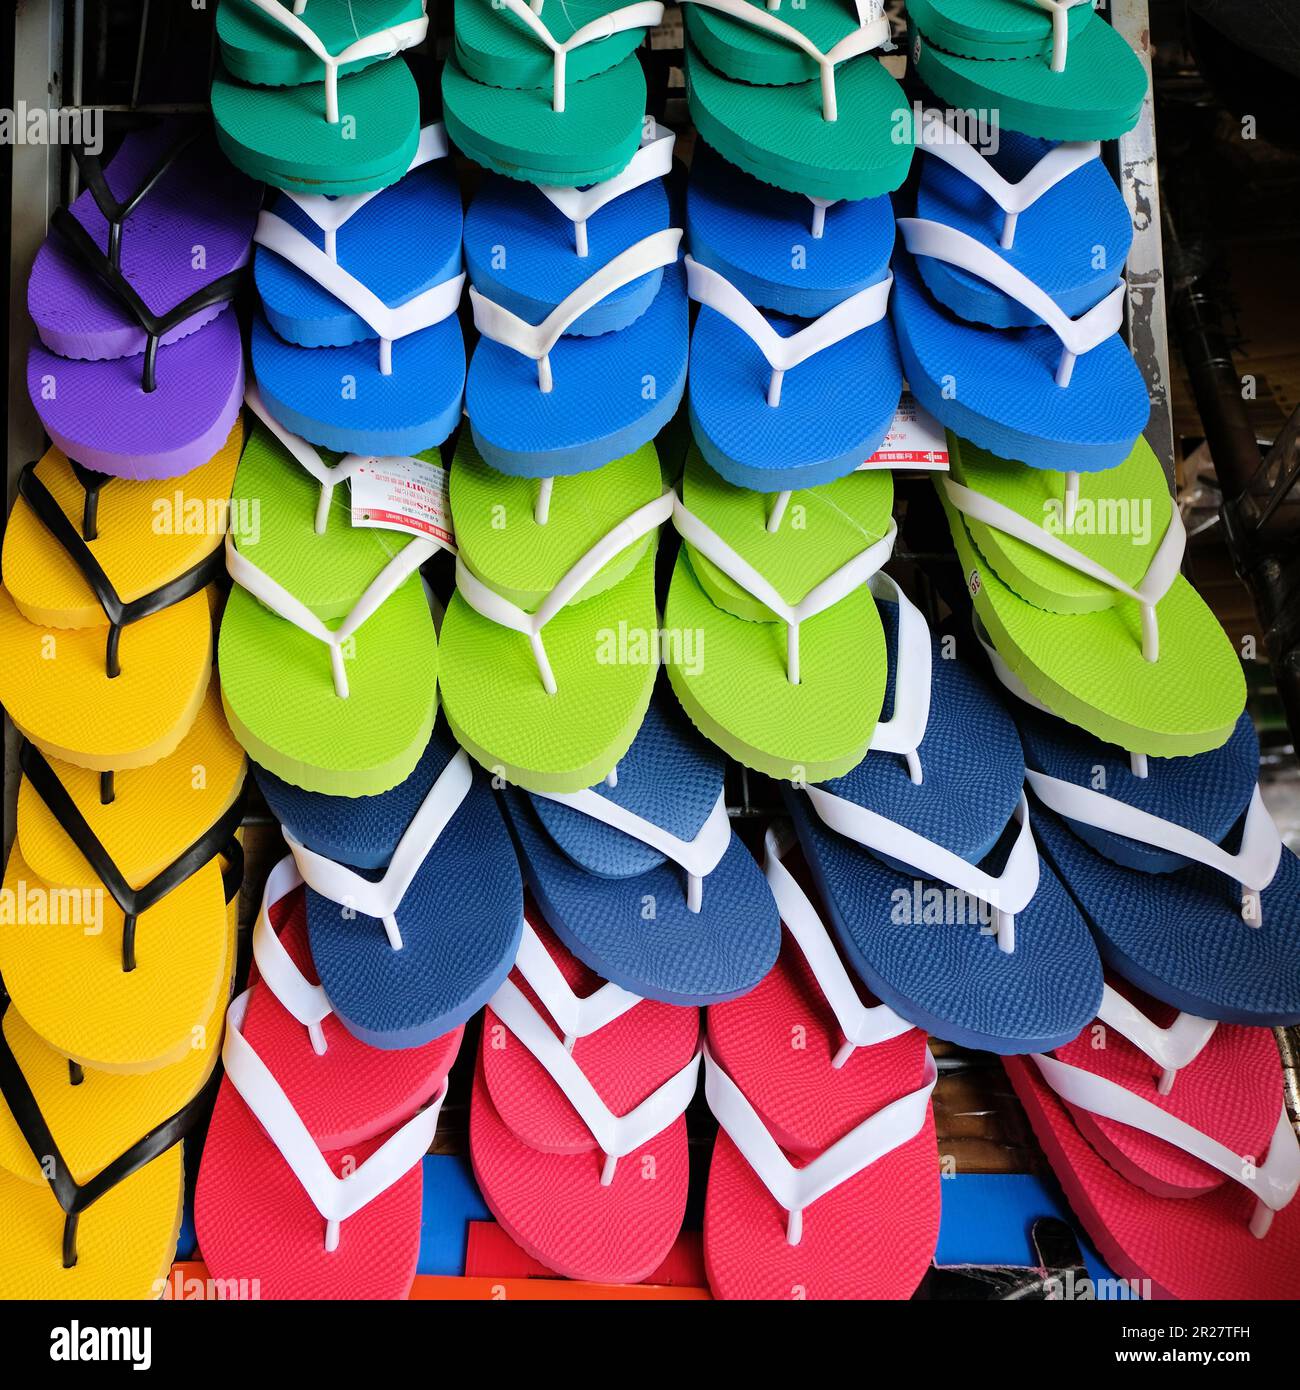 Rows of  many colorful flip flops for sale on the Island of Xiaoliuqiu in Taiwan, ROC; comfortable beachwear or footwear. Stock Photo